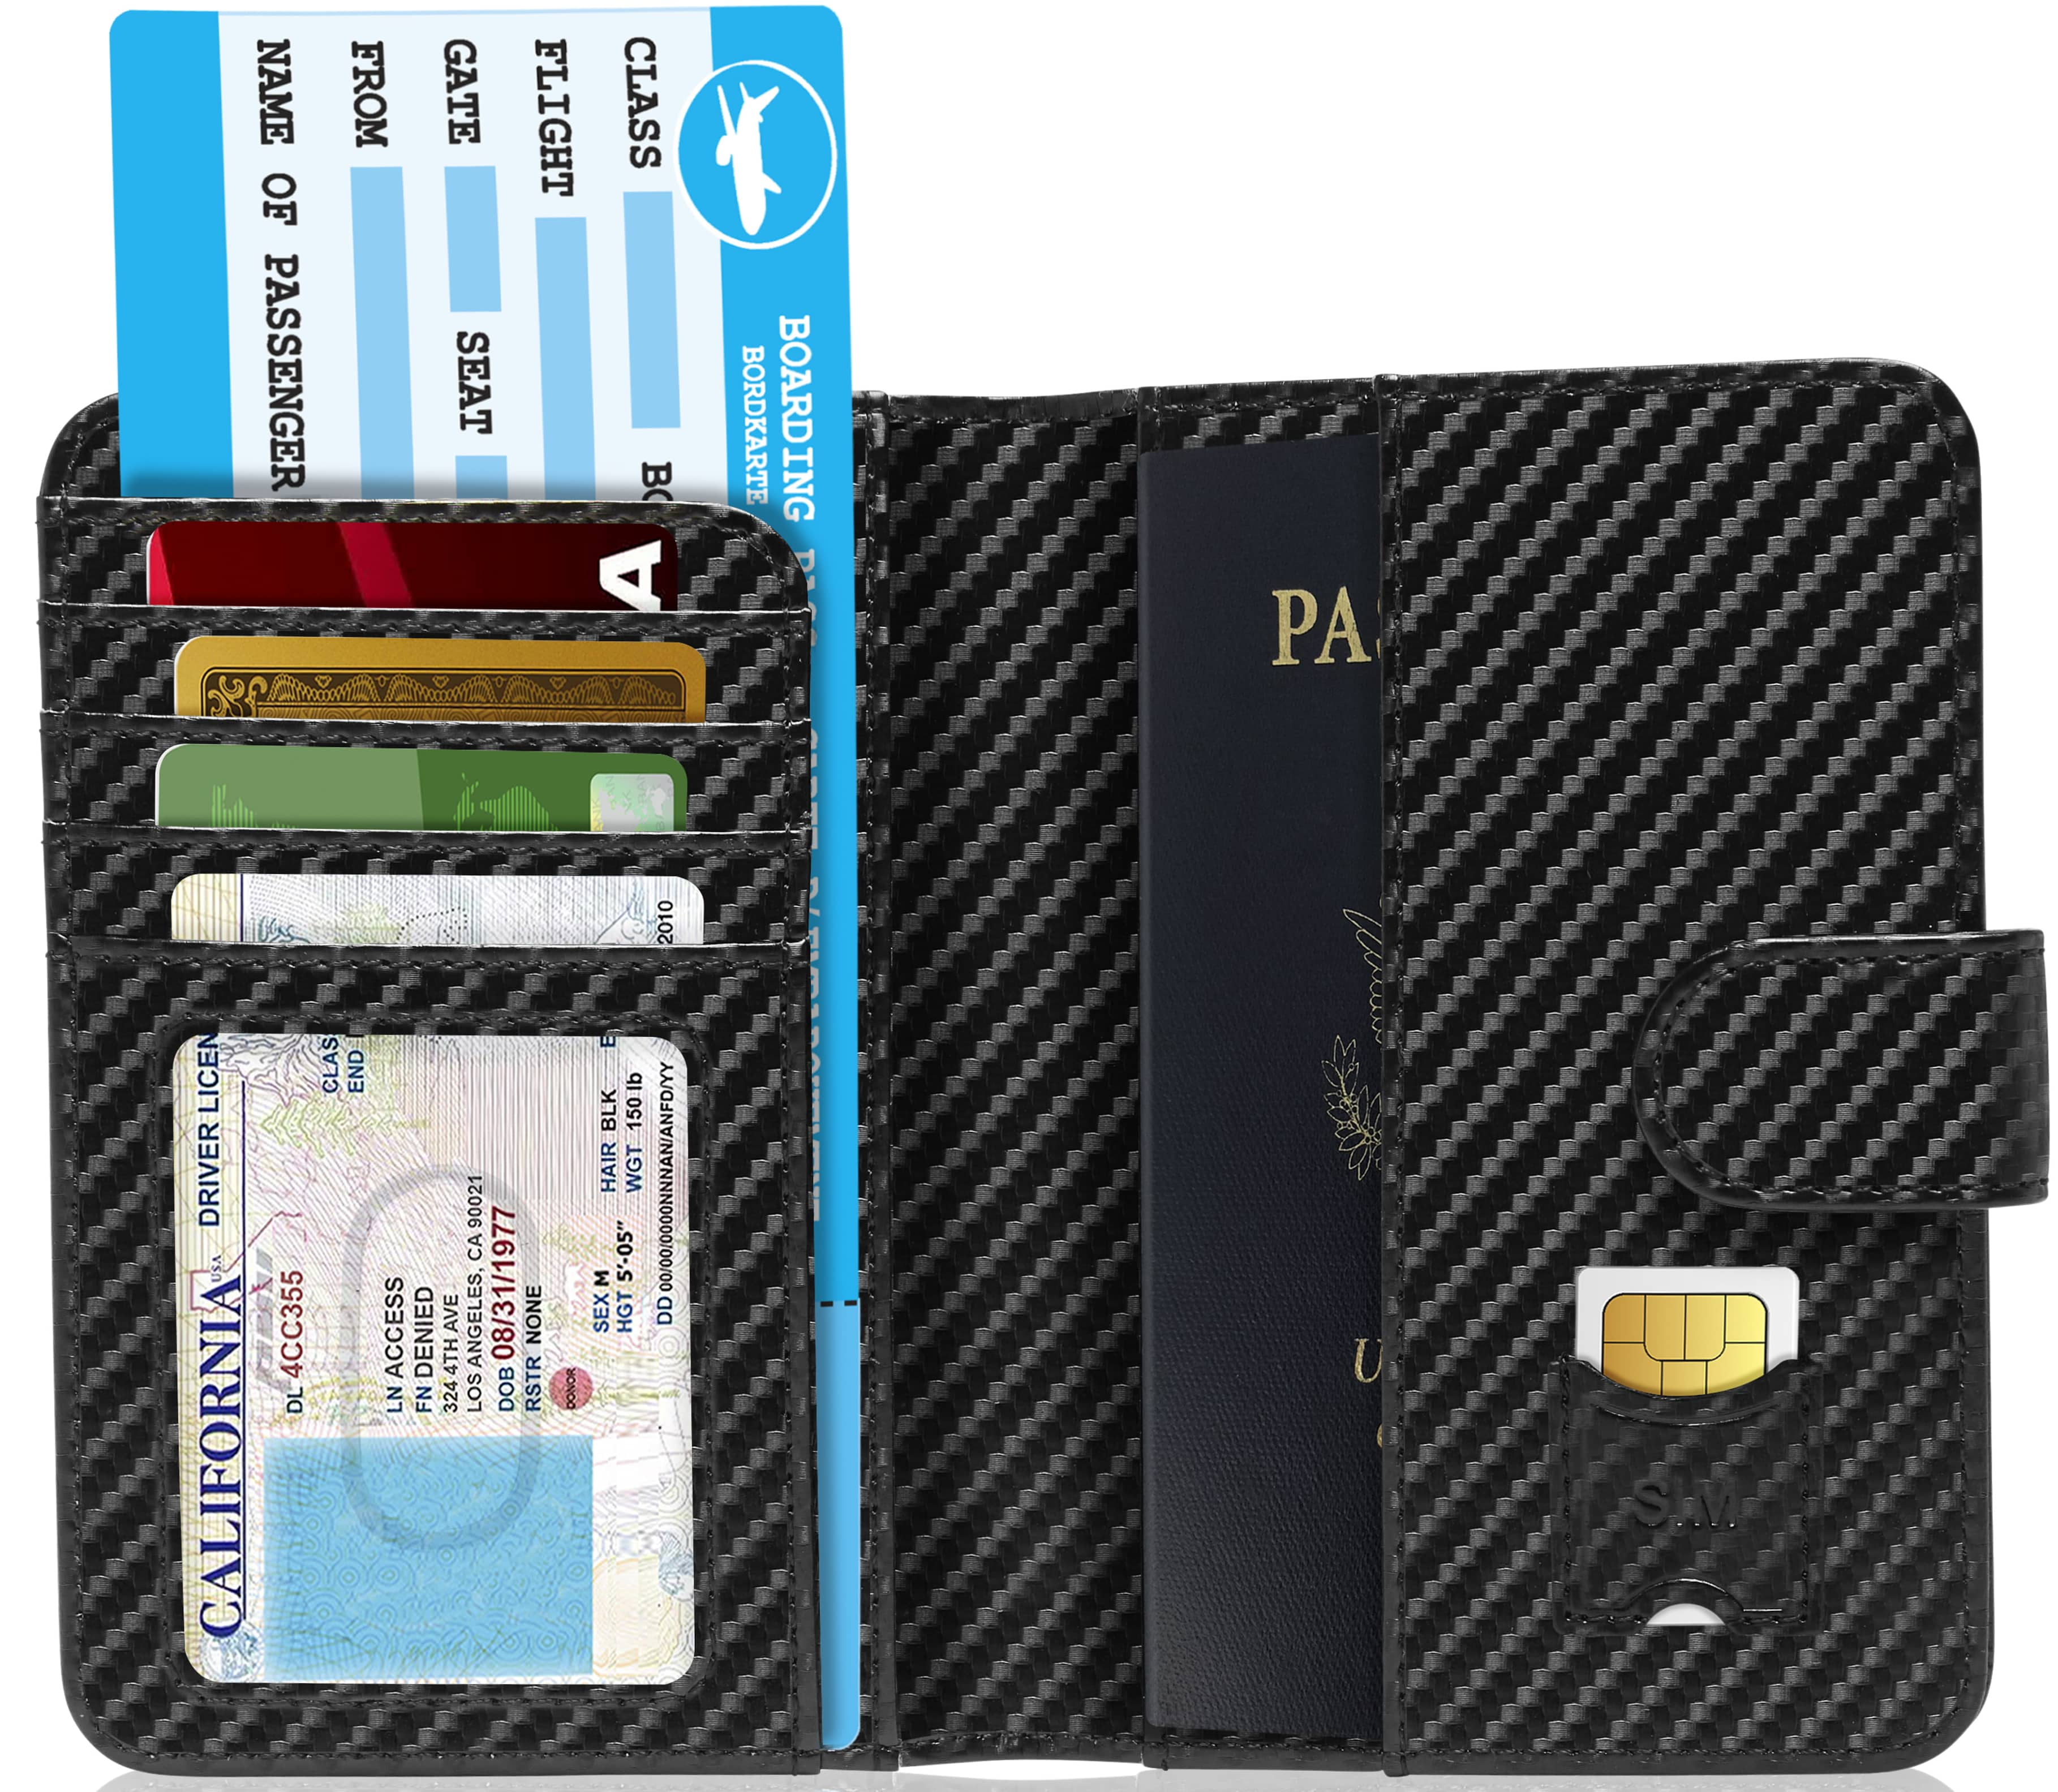 Passport Covers,Leather Passport Holder RFID Blocking,Travel Document Holder for Men&Women,Credit Card and Document Protection